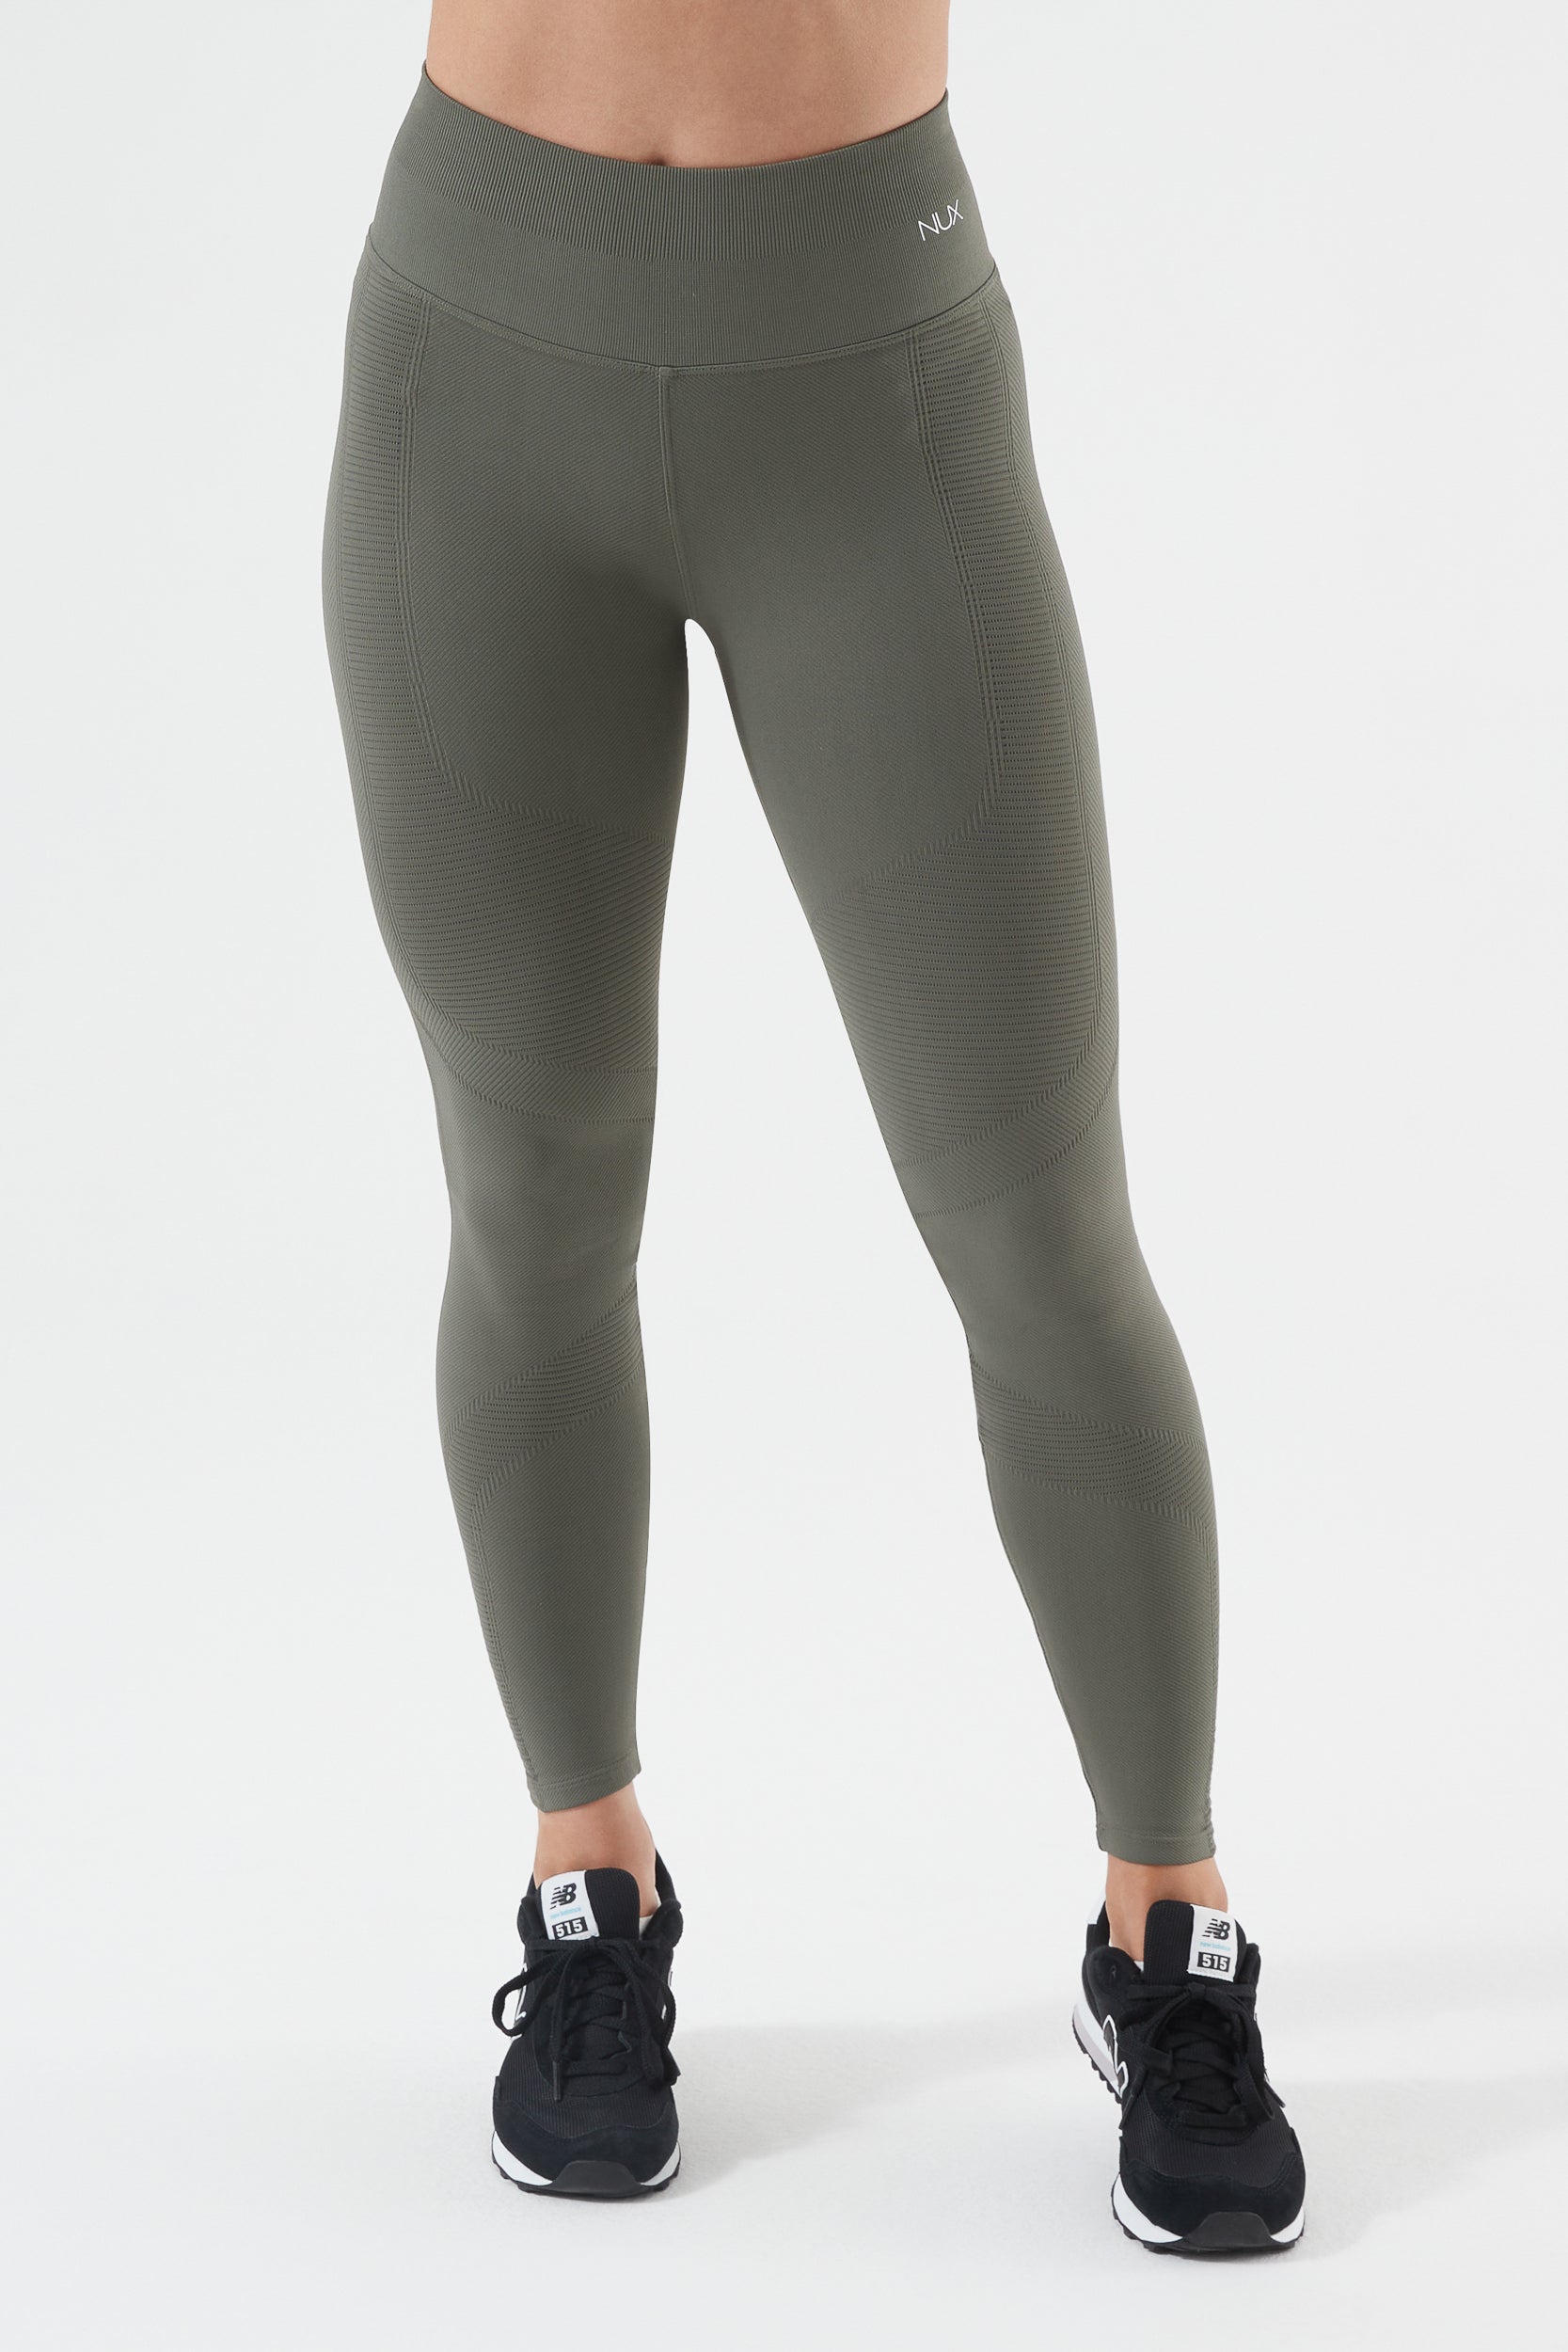 NUX ACTIVE Candy - One By One Leggings 